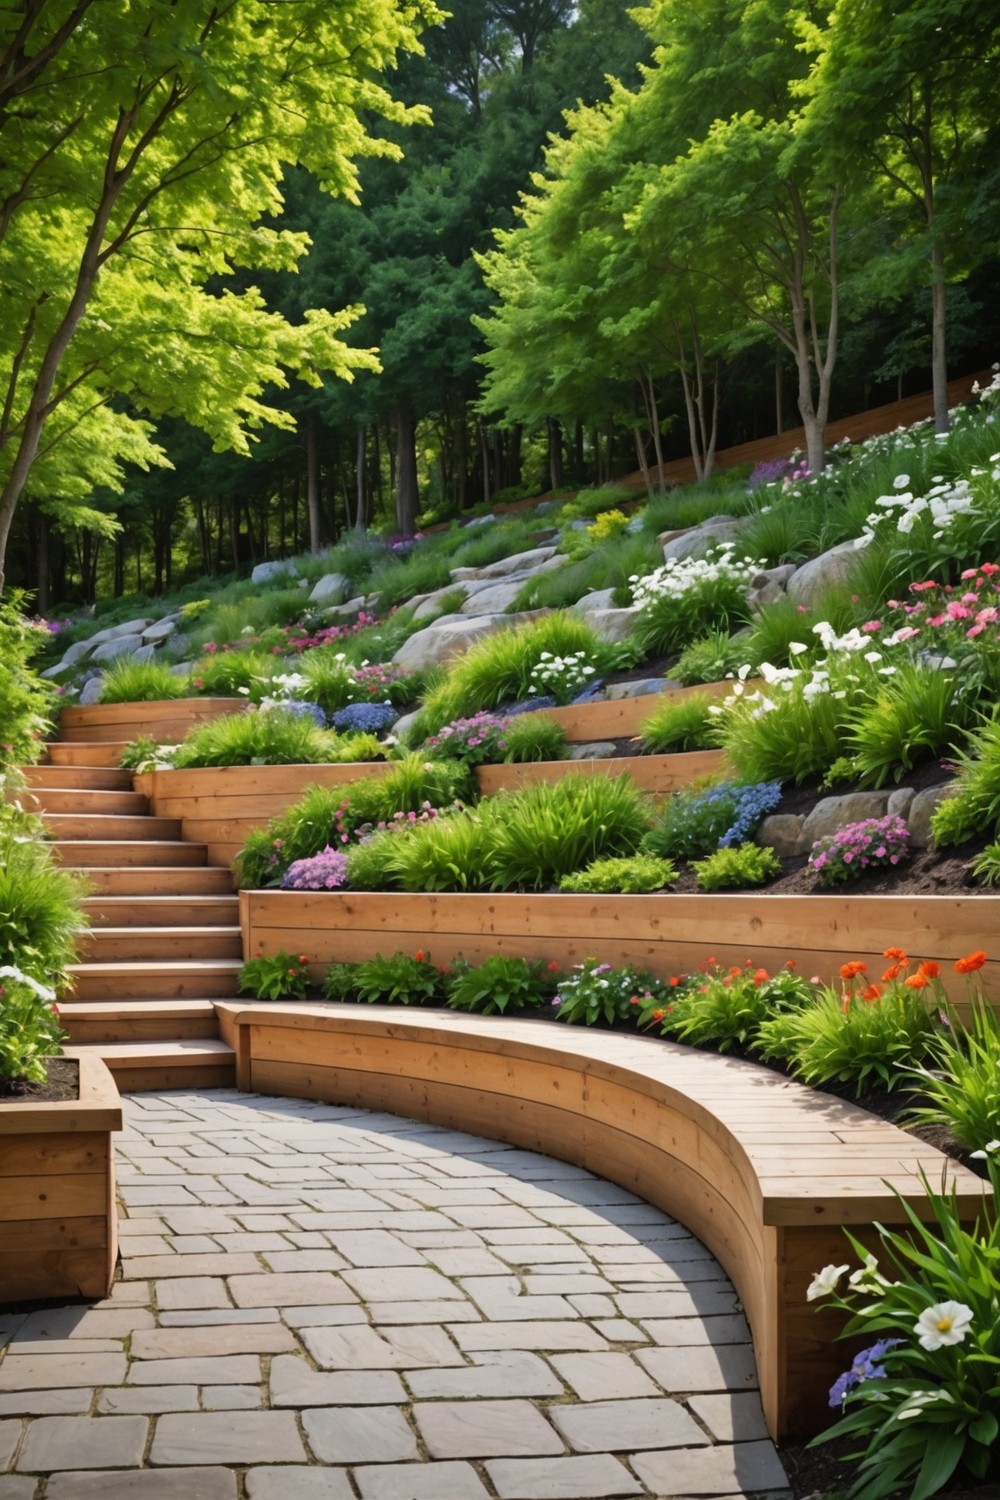 Timber Retaining Wall with Built-in Seating